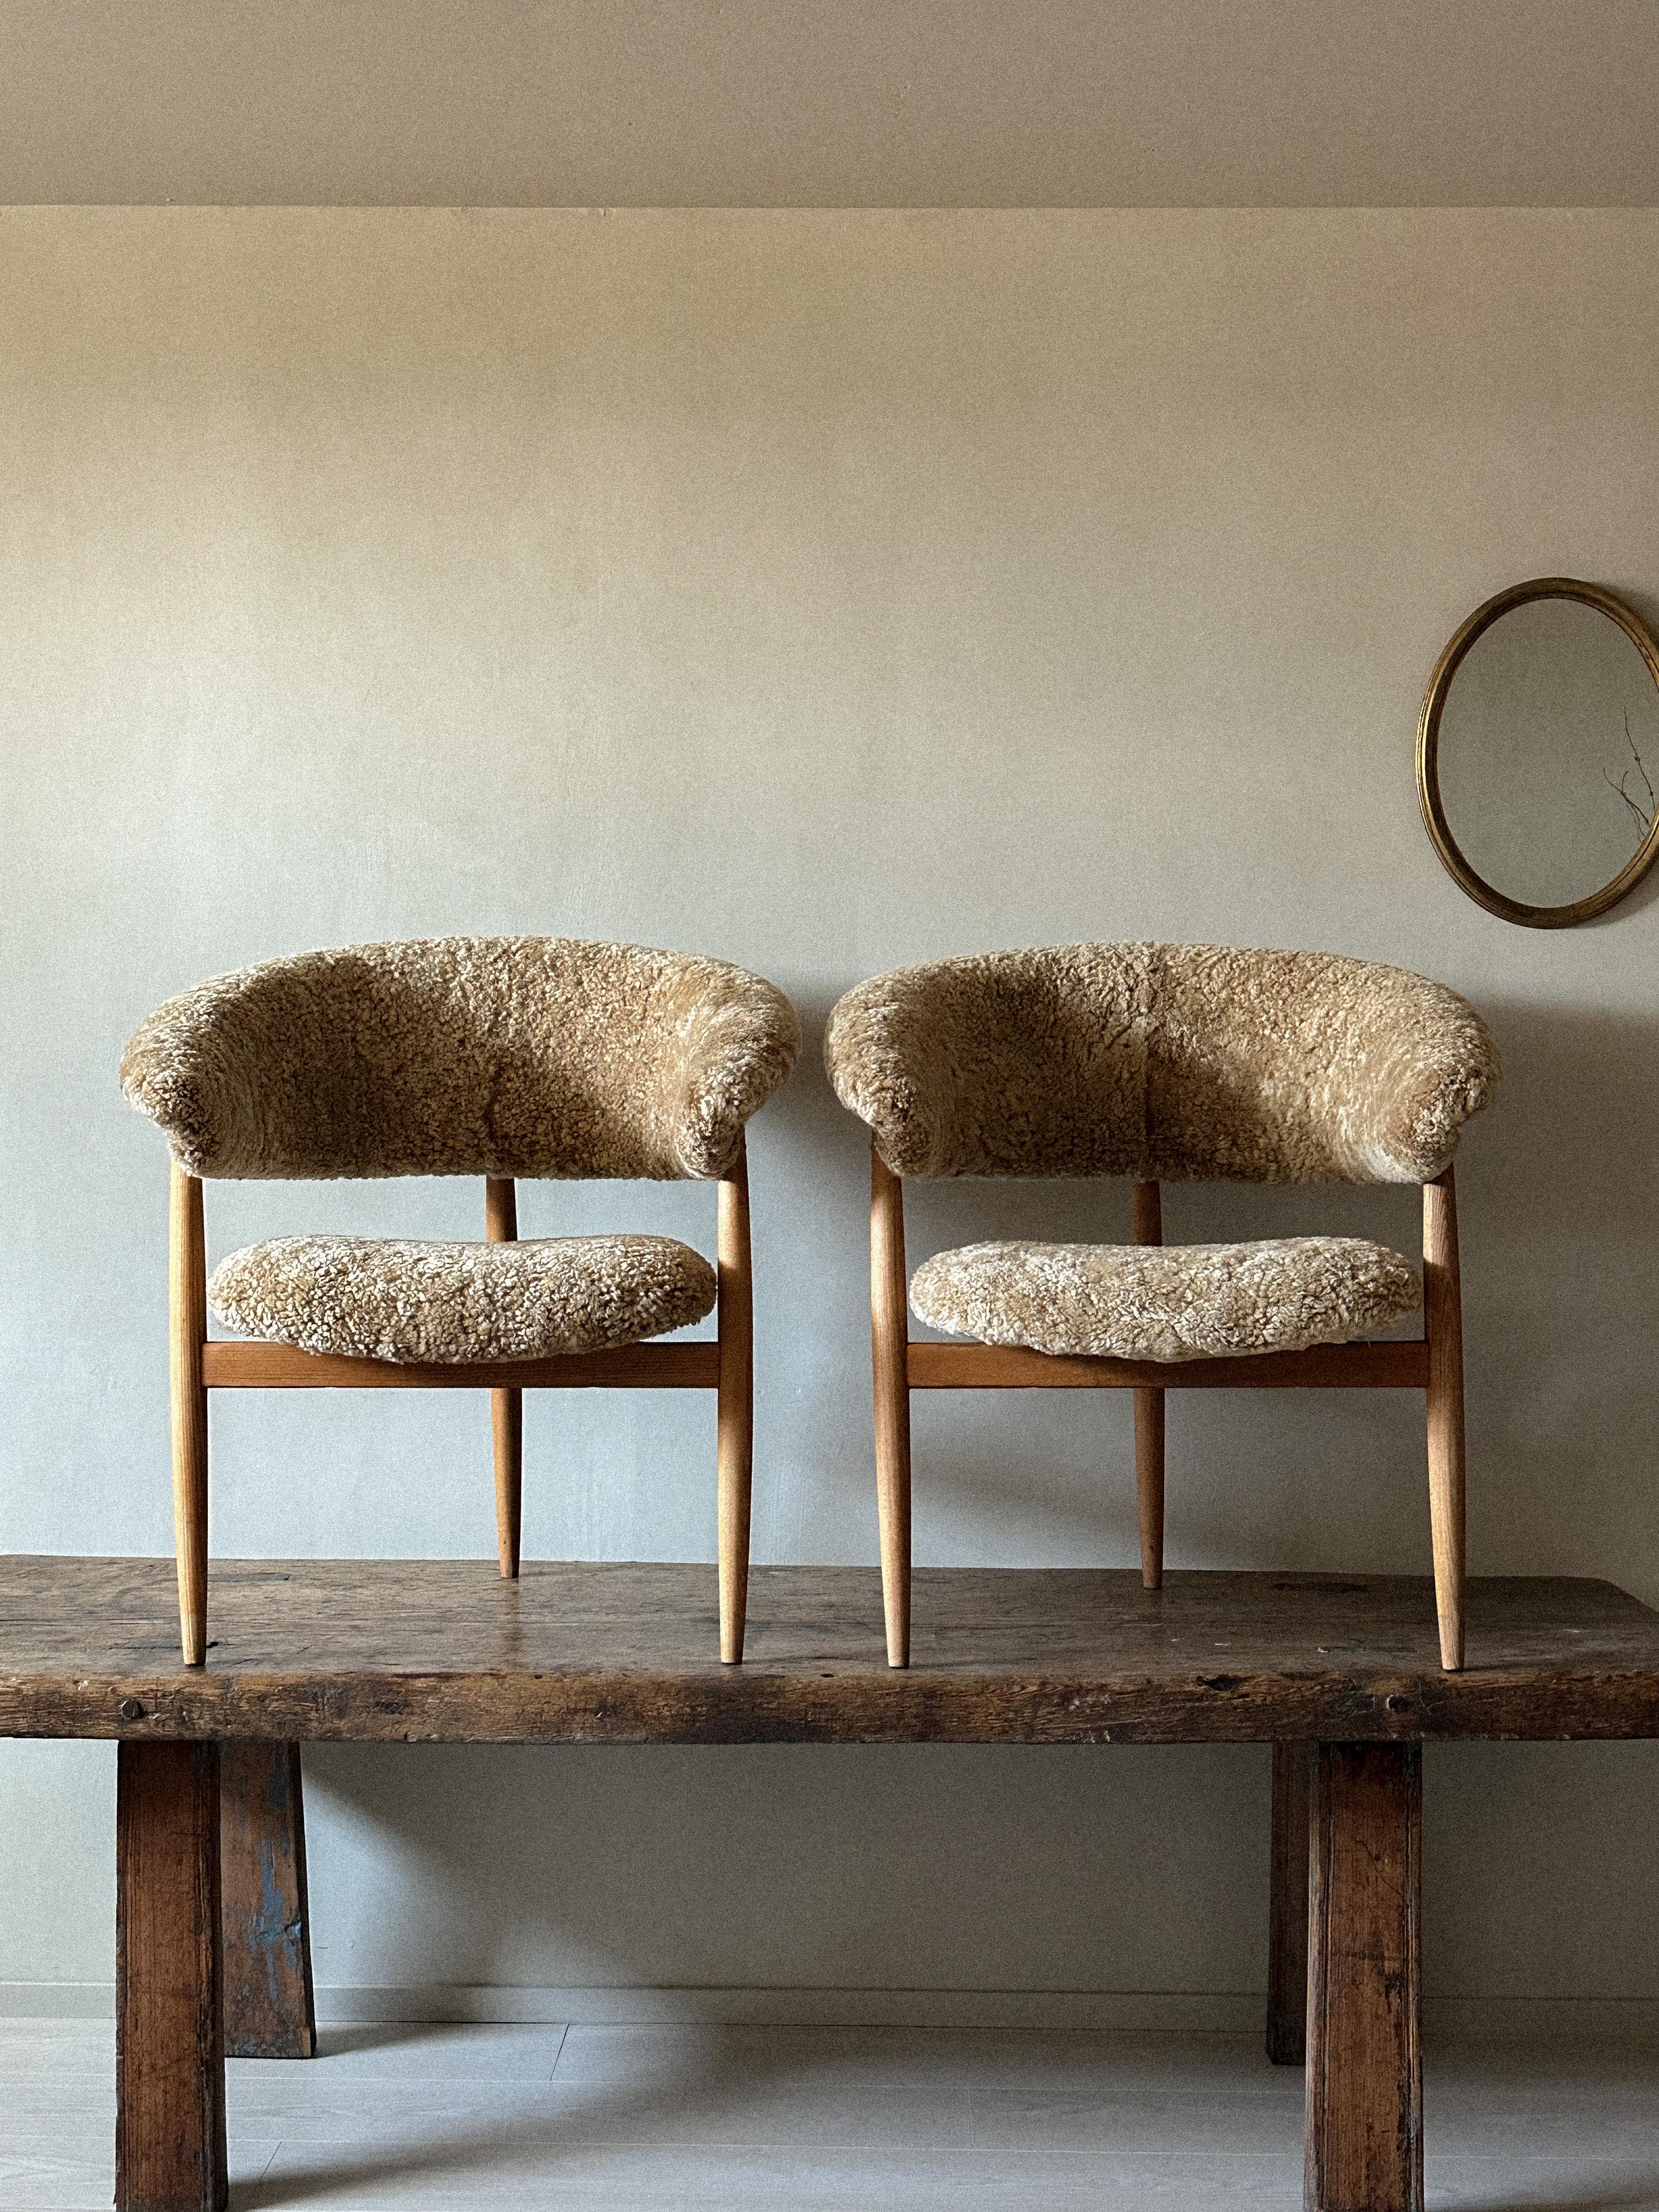 A rare pair of three-legged armchairs by the renowned designer Gerhard Berg, now expertly reupholstered in luxurious premium sheepskin. Originally crafted in the 1950s in Norway, Scandinavia, these chairs are a true testament to timeless elegance